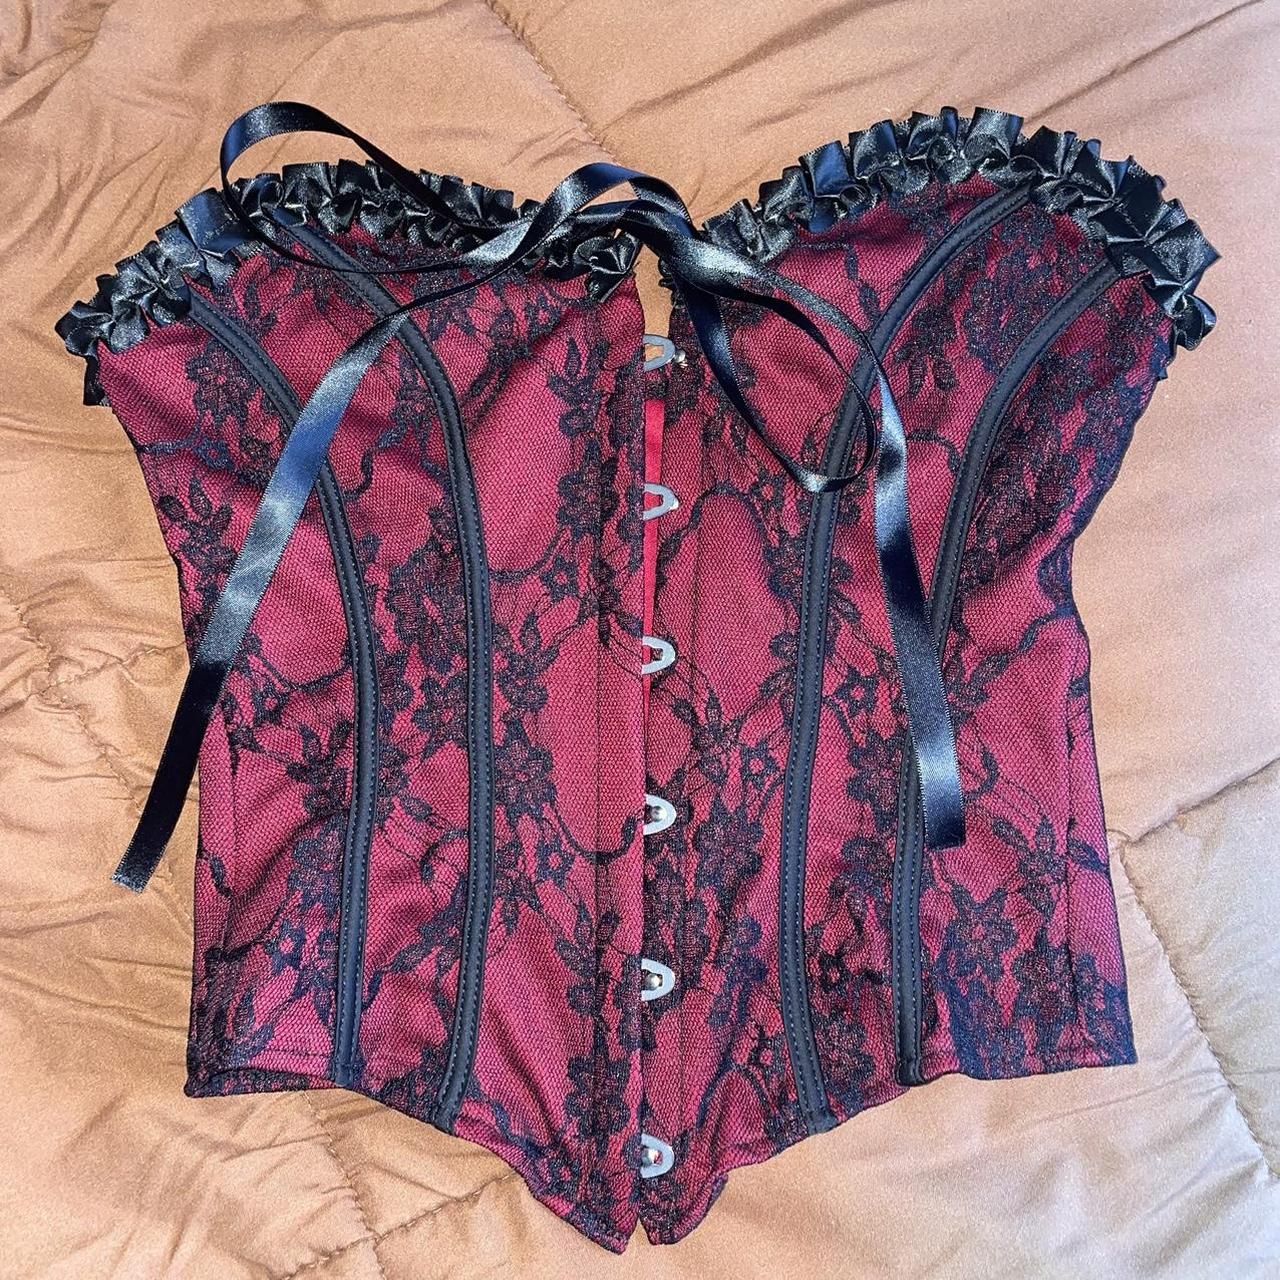 Red and black corset top size xxs. Brand new with tags - Depop